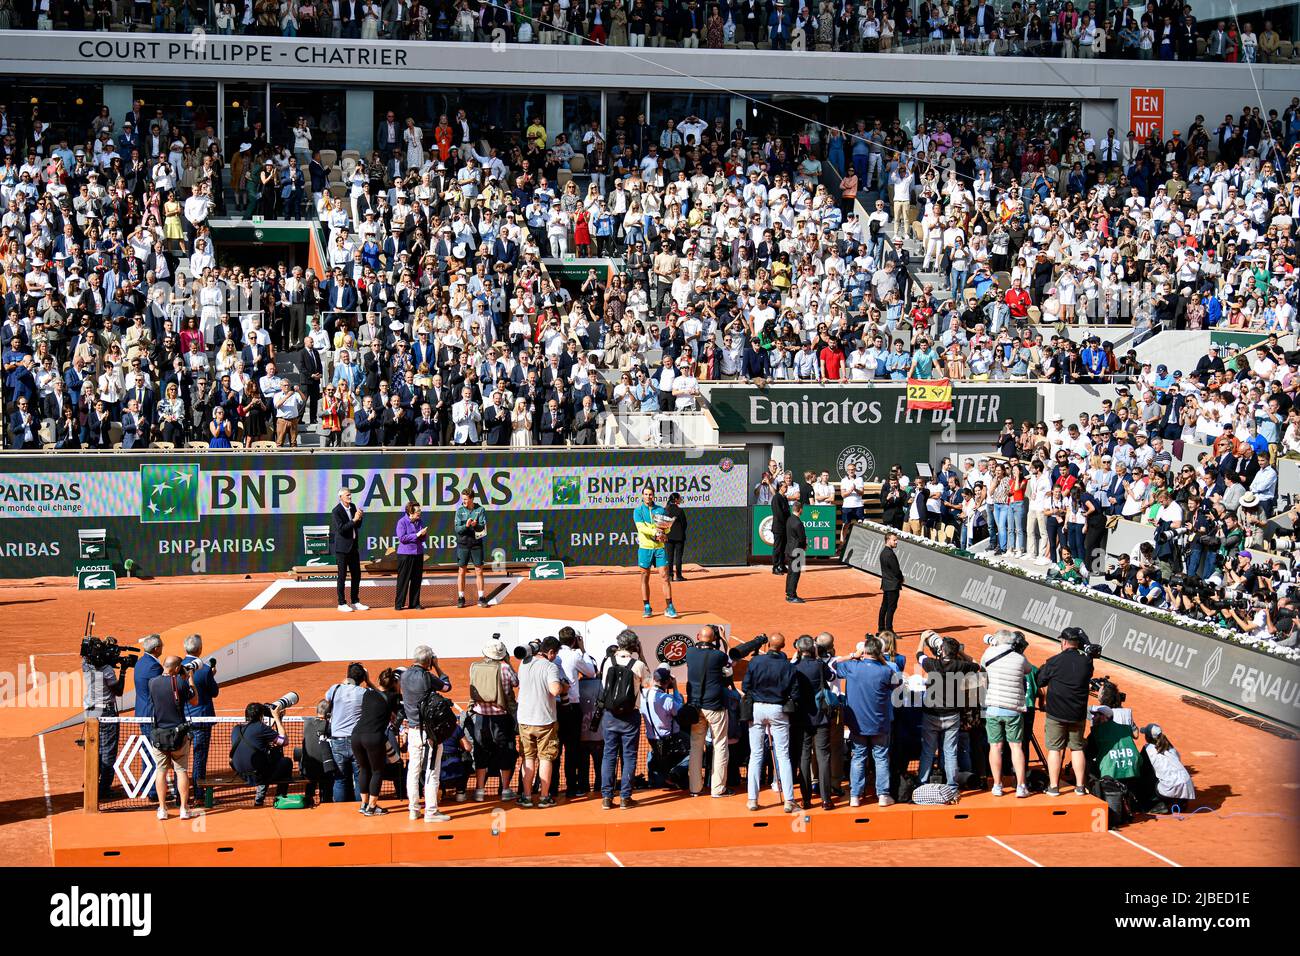 Court philippe chatrier, french open hi-res stock photography and images -  Page 2 - Alamy